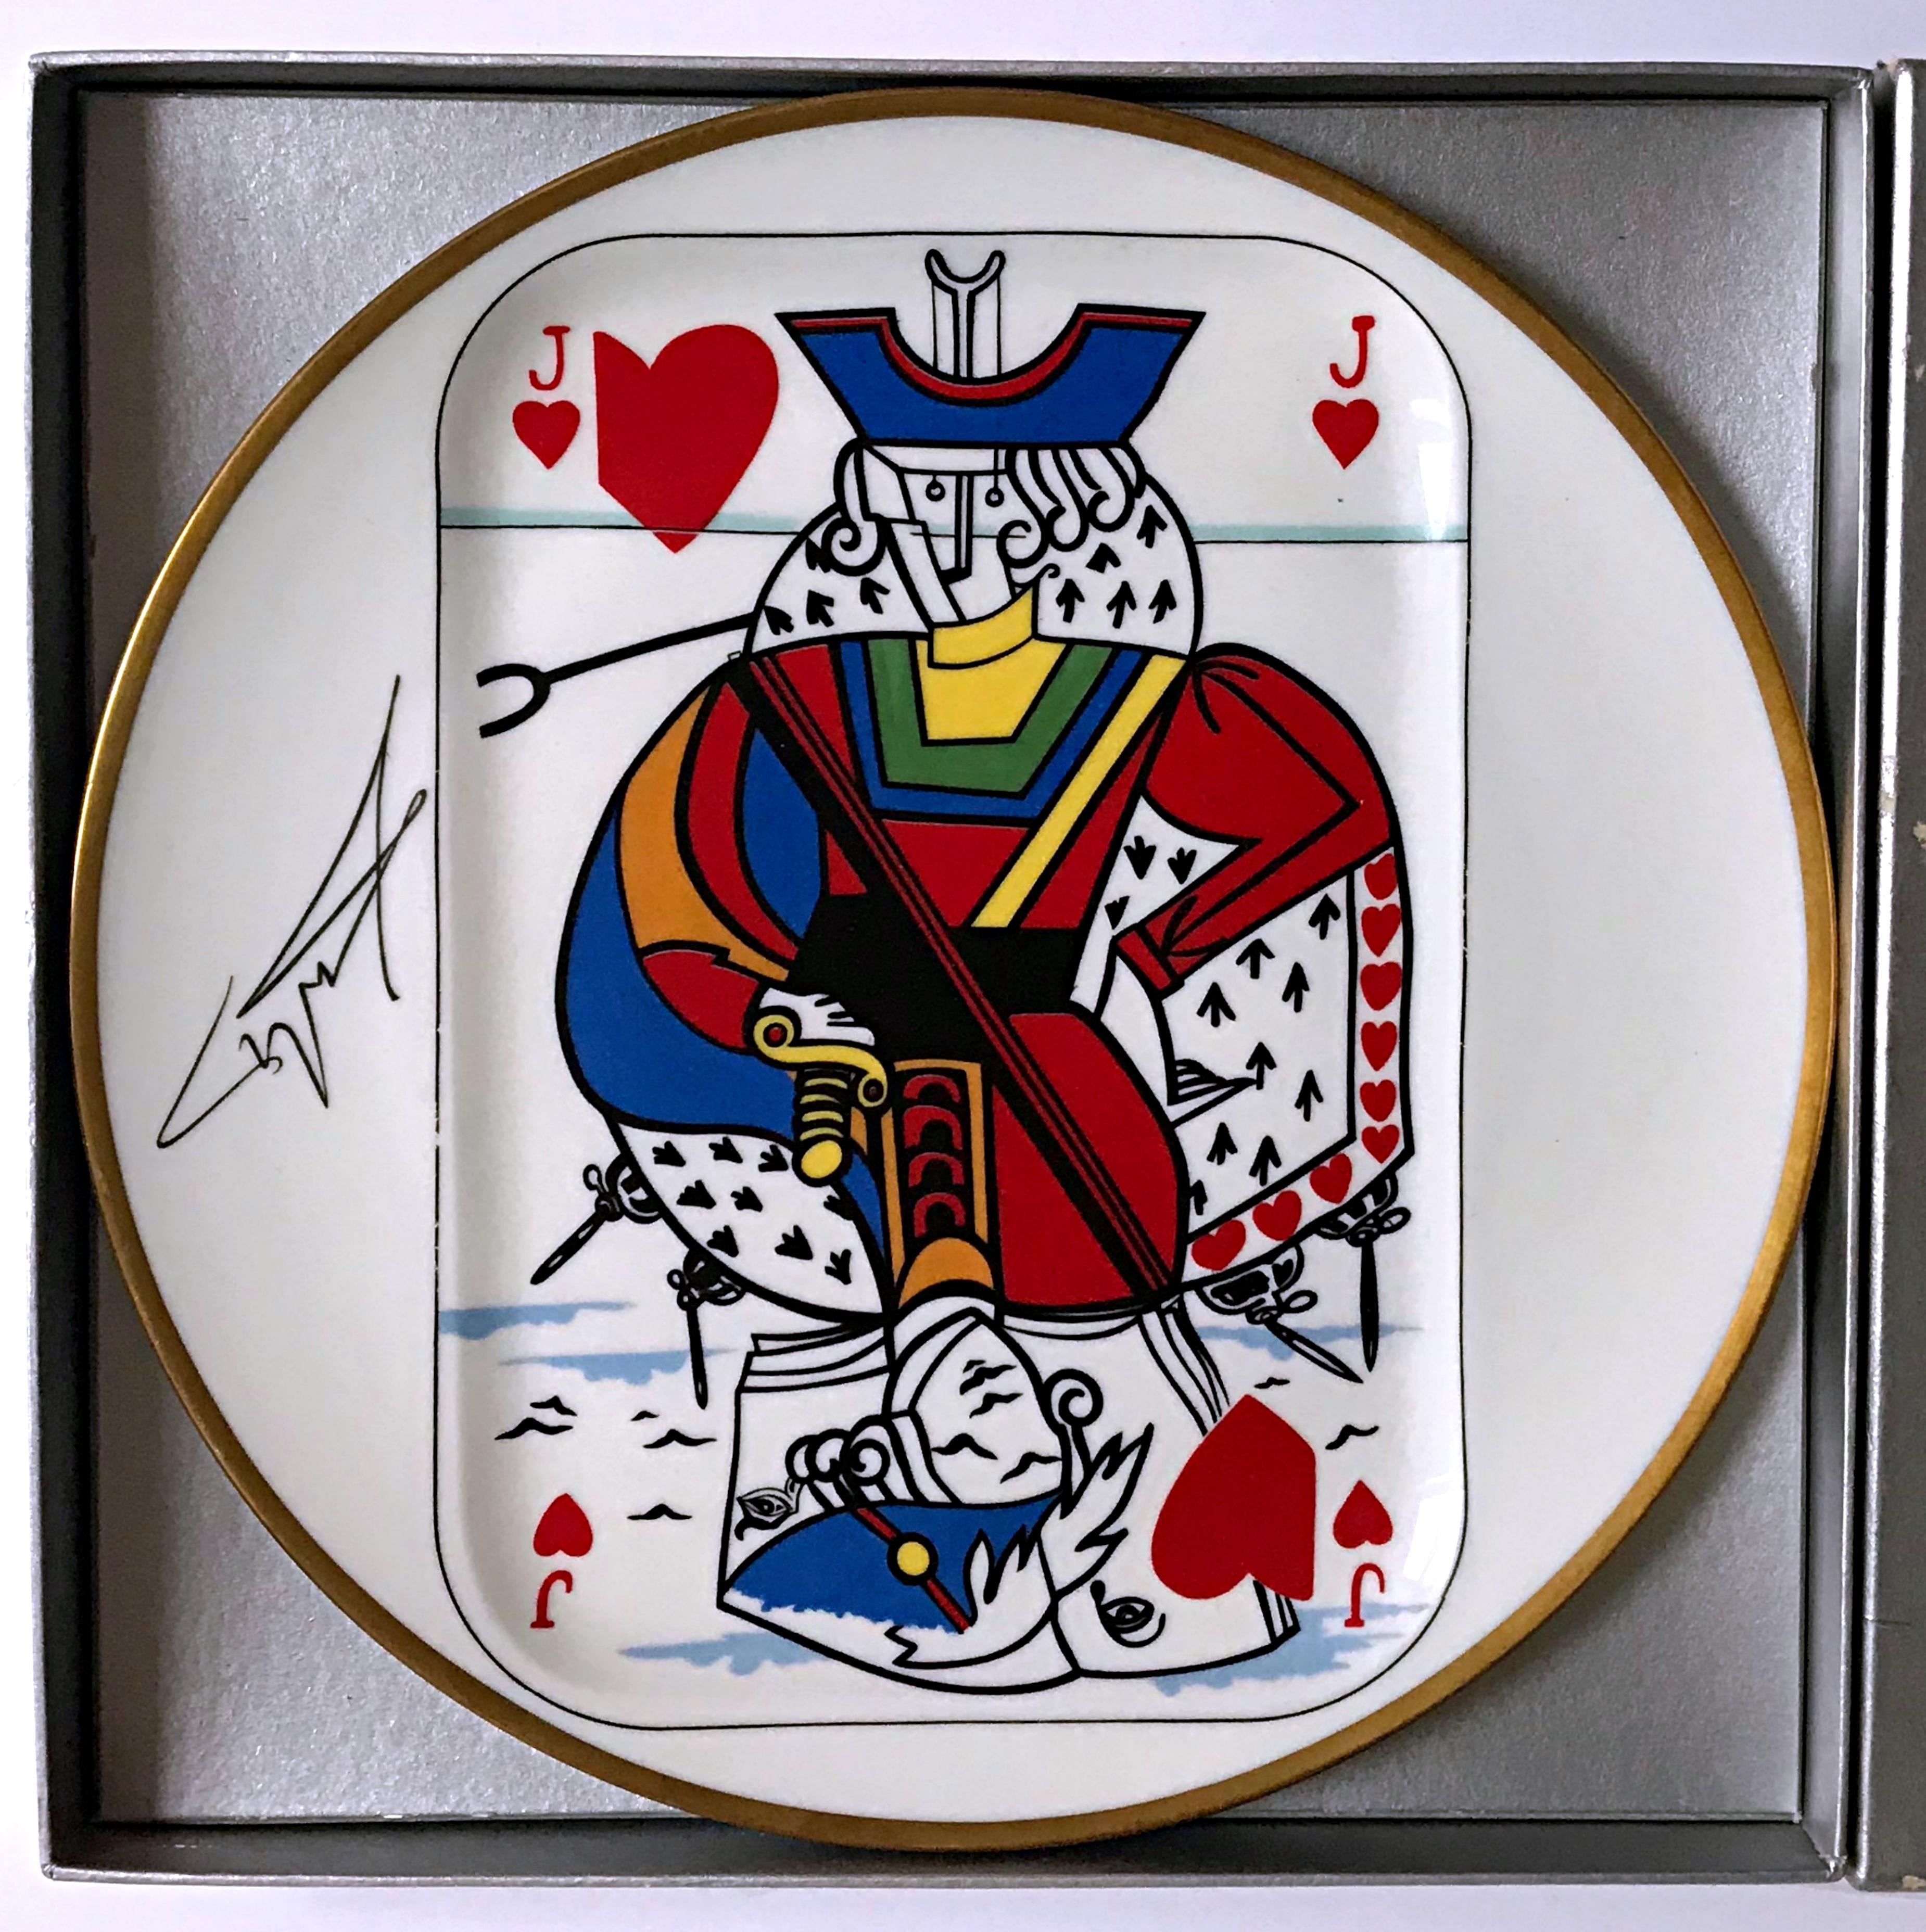 Salvador Dali
Jack of Hearts, 1967
Limited Edition Limoges Porcelain Plate. Signature Fired into Plate. Numbered with COA
9 3/4 × 9 3/4 × 3/10 inches  24.8 × 24.8 × 0.8 cm
Edition 358/2000 (see additional photographs)
Artist Signature and edition